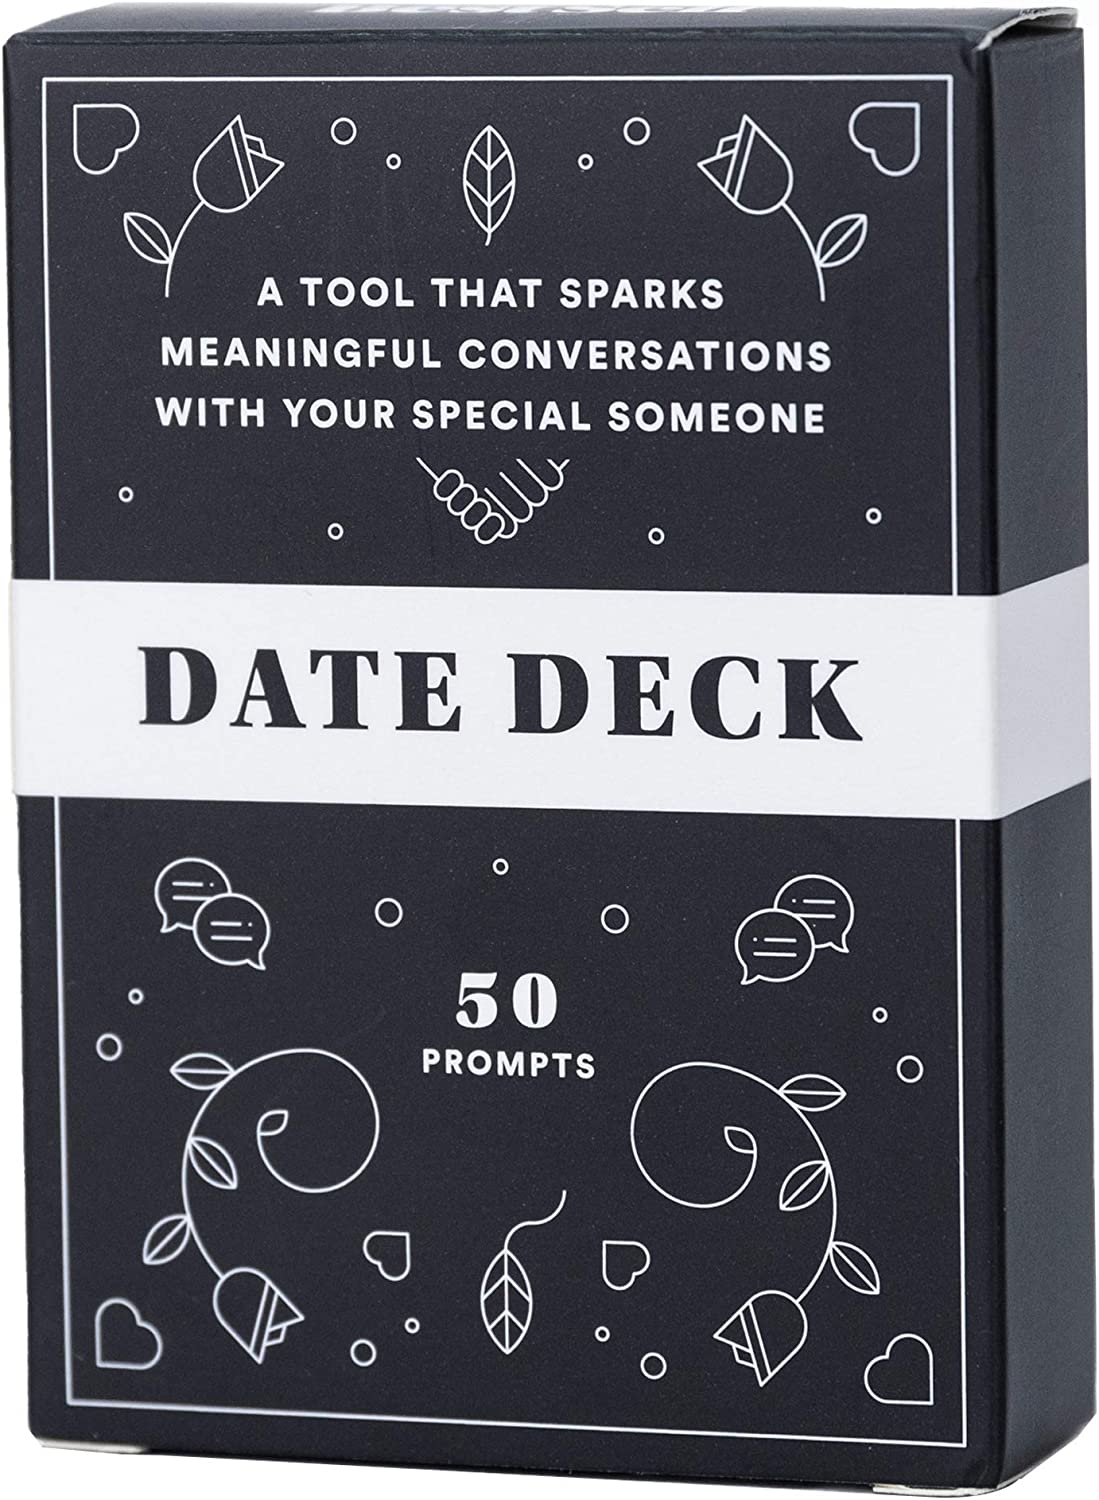 Date Deck by BestSelf — Exciting, Engaging, and Though-Provoking